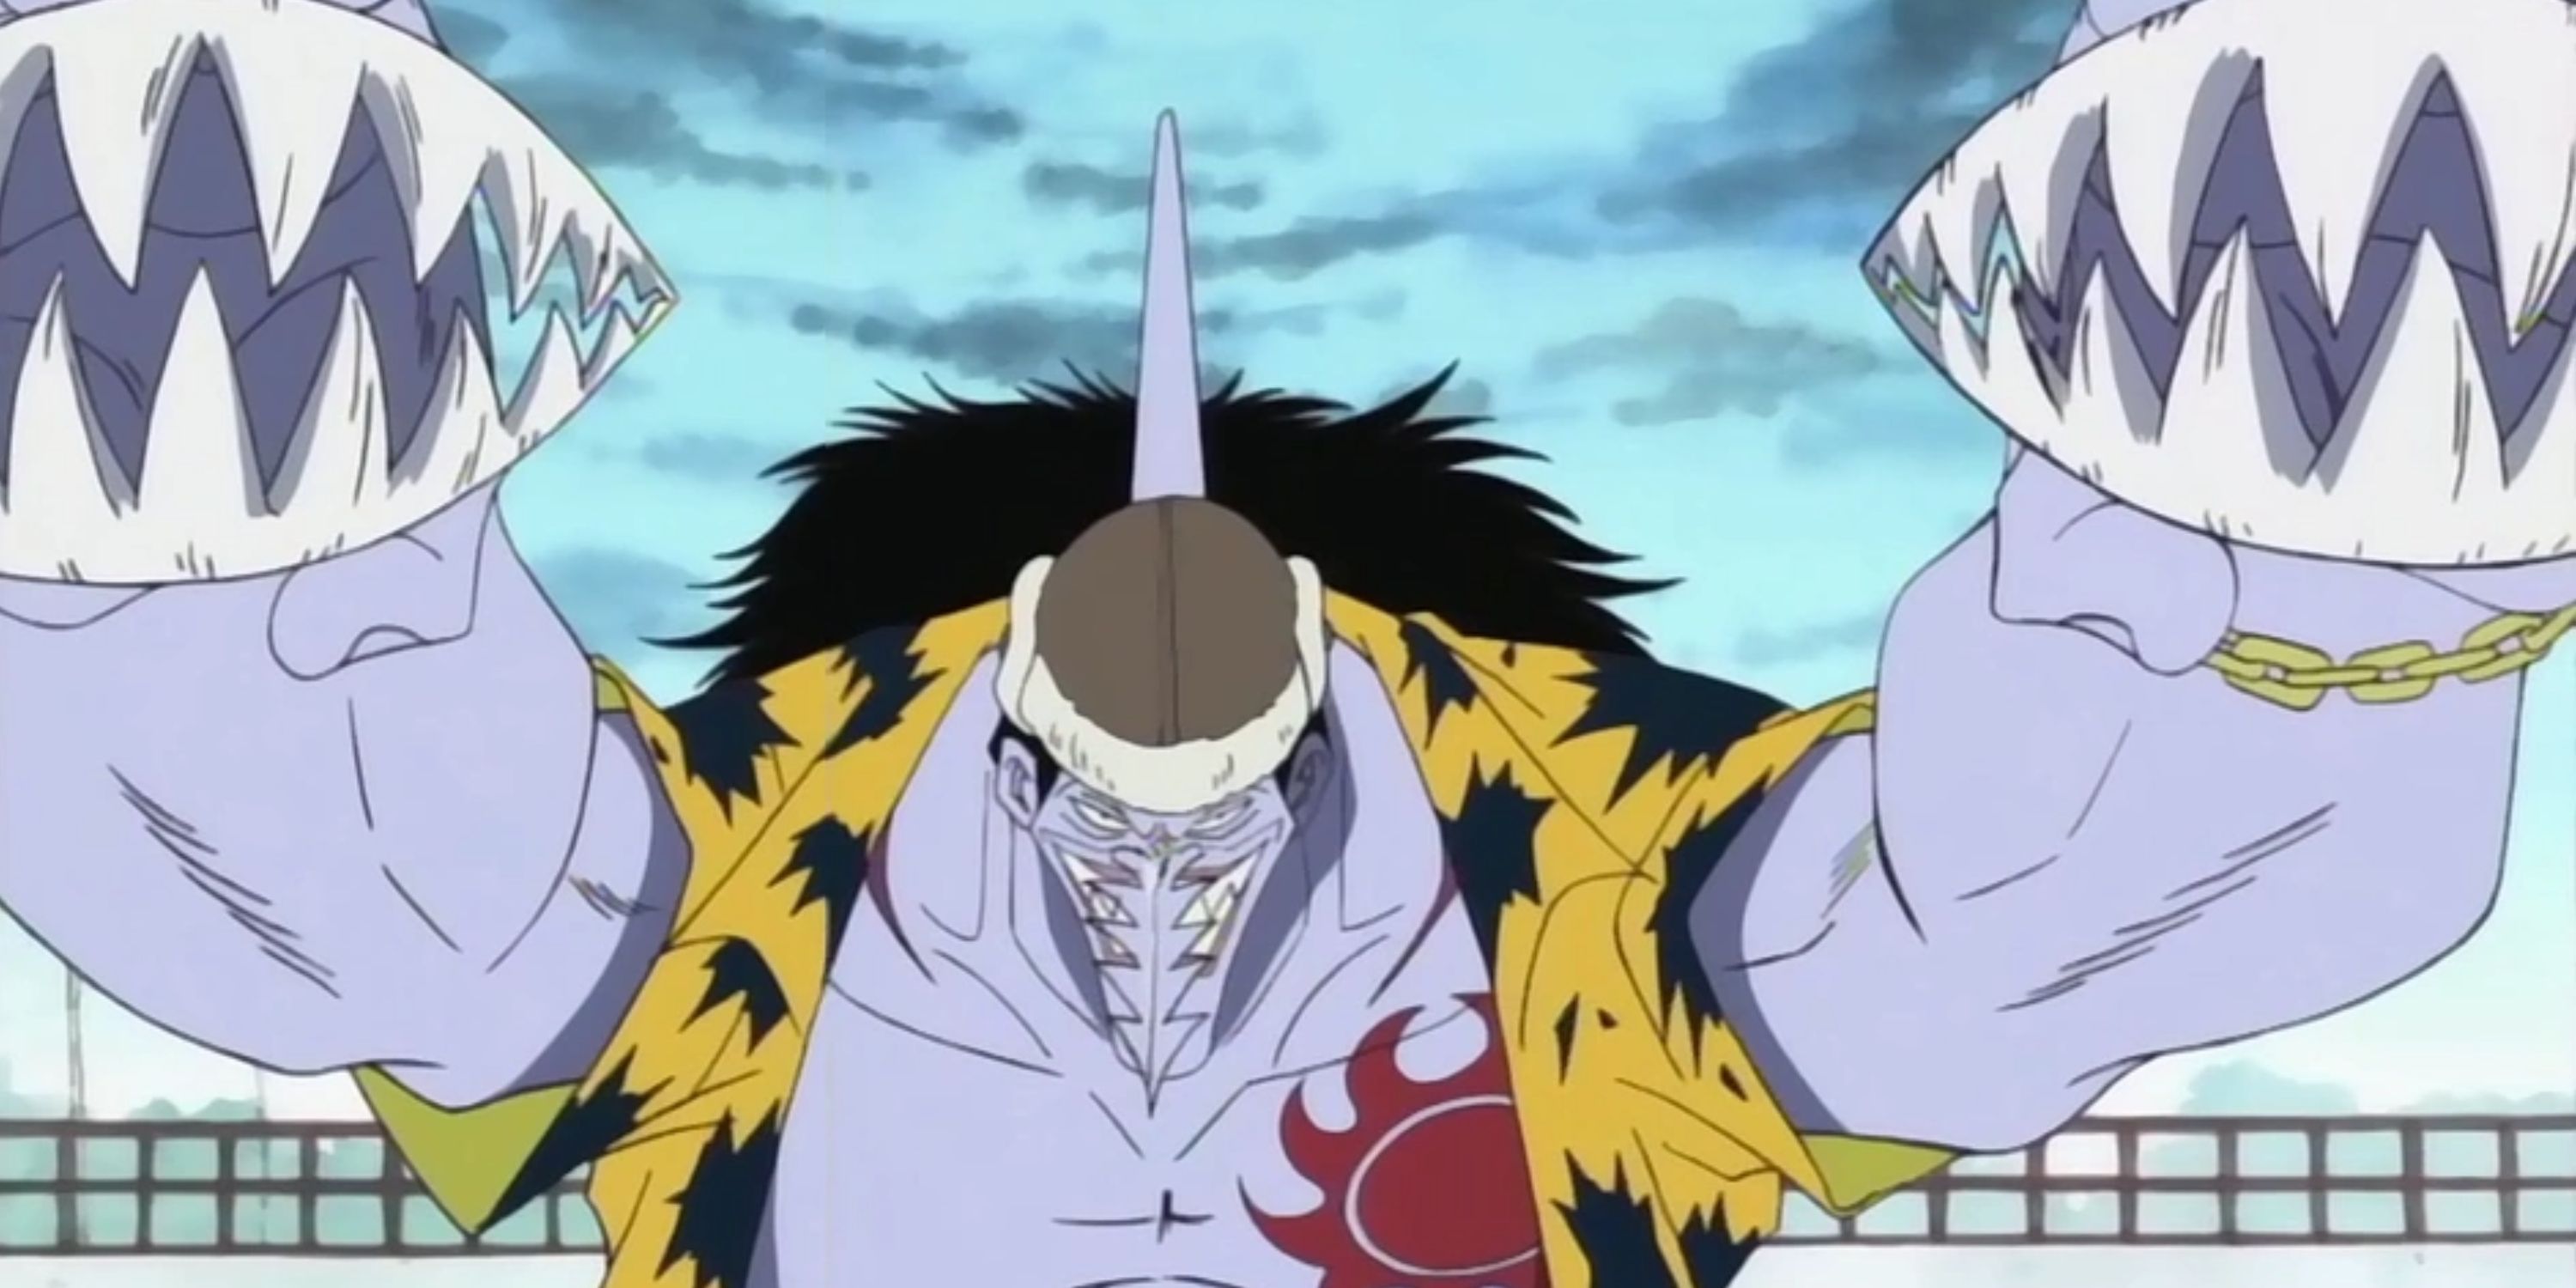 Arlong wields his teeth during his fight against Monkey D. Luffy in One Piece.